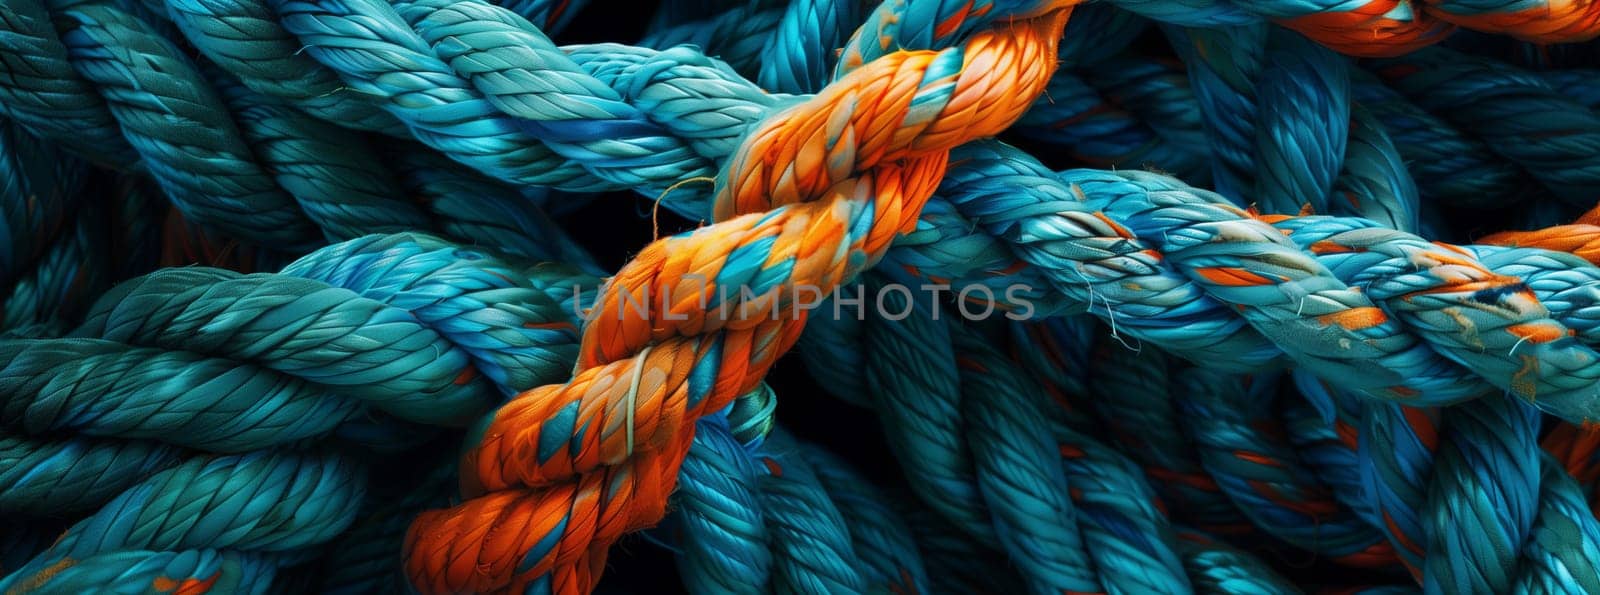 Electric blue woolen ropes in a pattern pile, creating a vibrant art display by richwolf